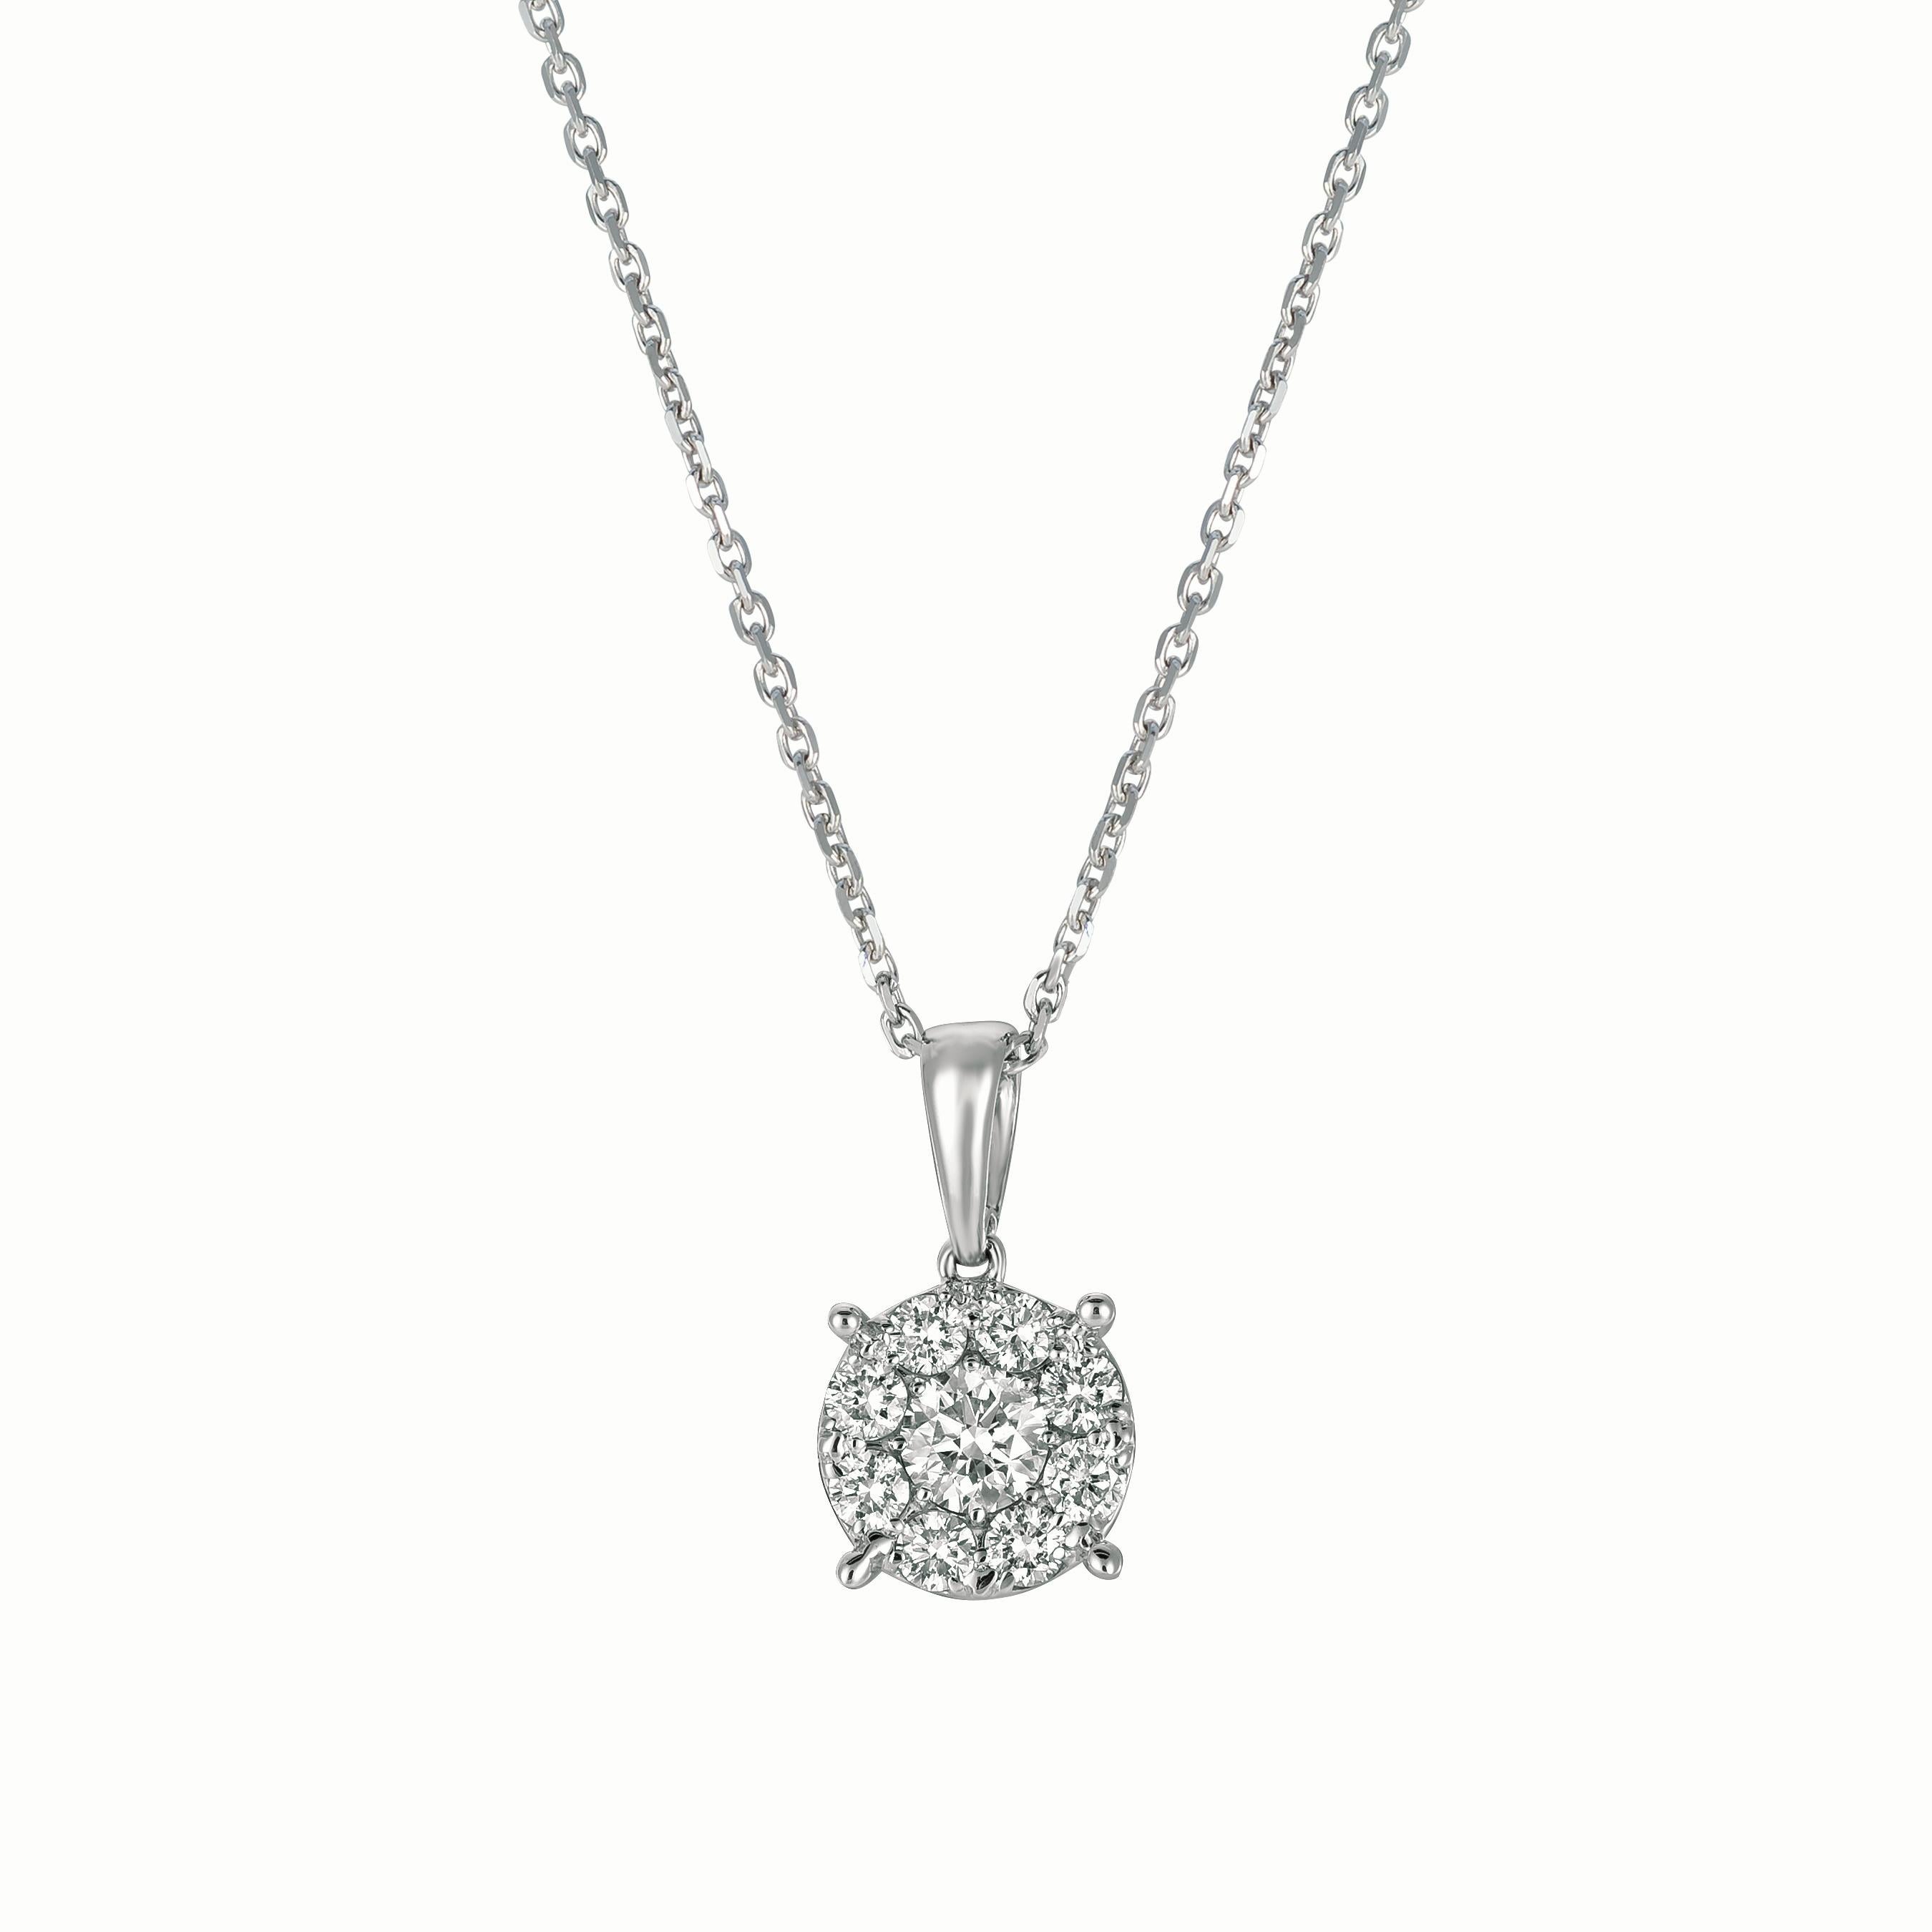 0.75 Carat Natural Diamond Necklace 14K White Gold G SI 18 inches chain

100% Natural Diamonds, Not Enhanced in any way Round Cut Diamond Necklace  
0.75CT
G-H 
SI  
5/8 inch in height, 3/8 inch in width
14K White Gold,    Prong style,    2.6